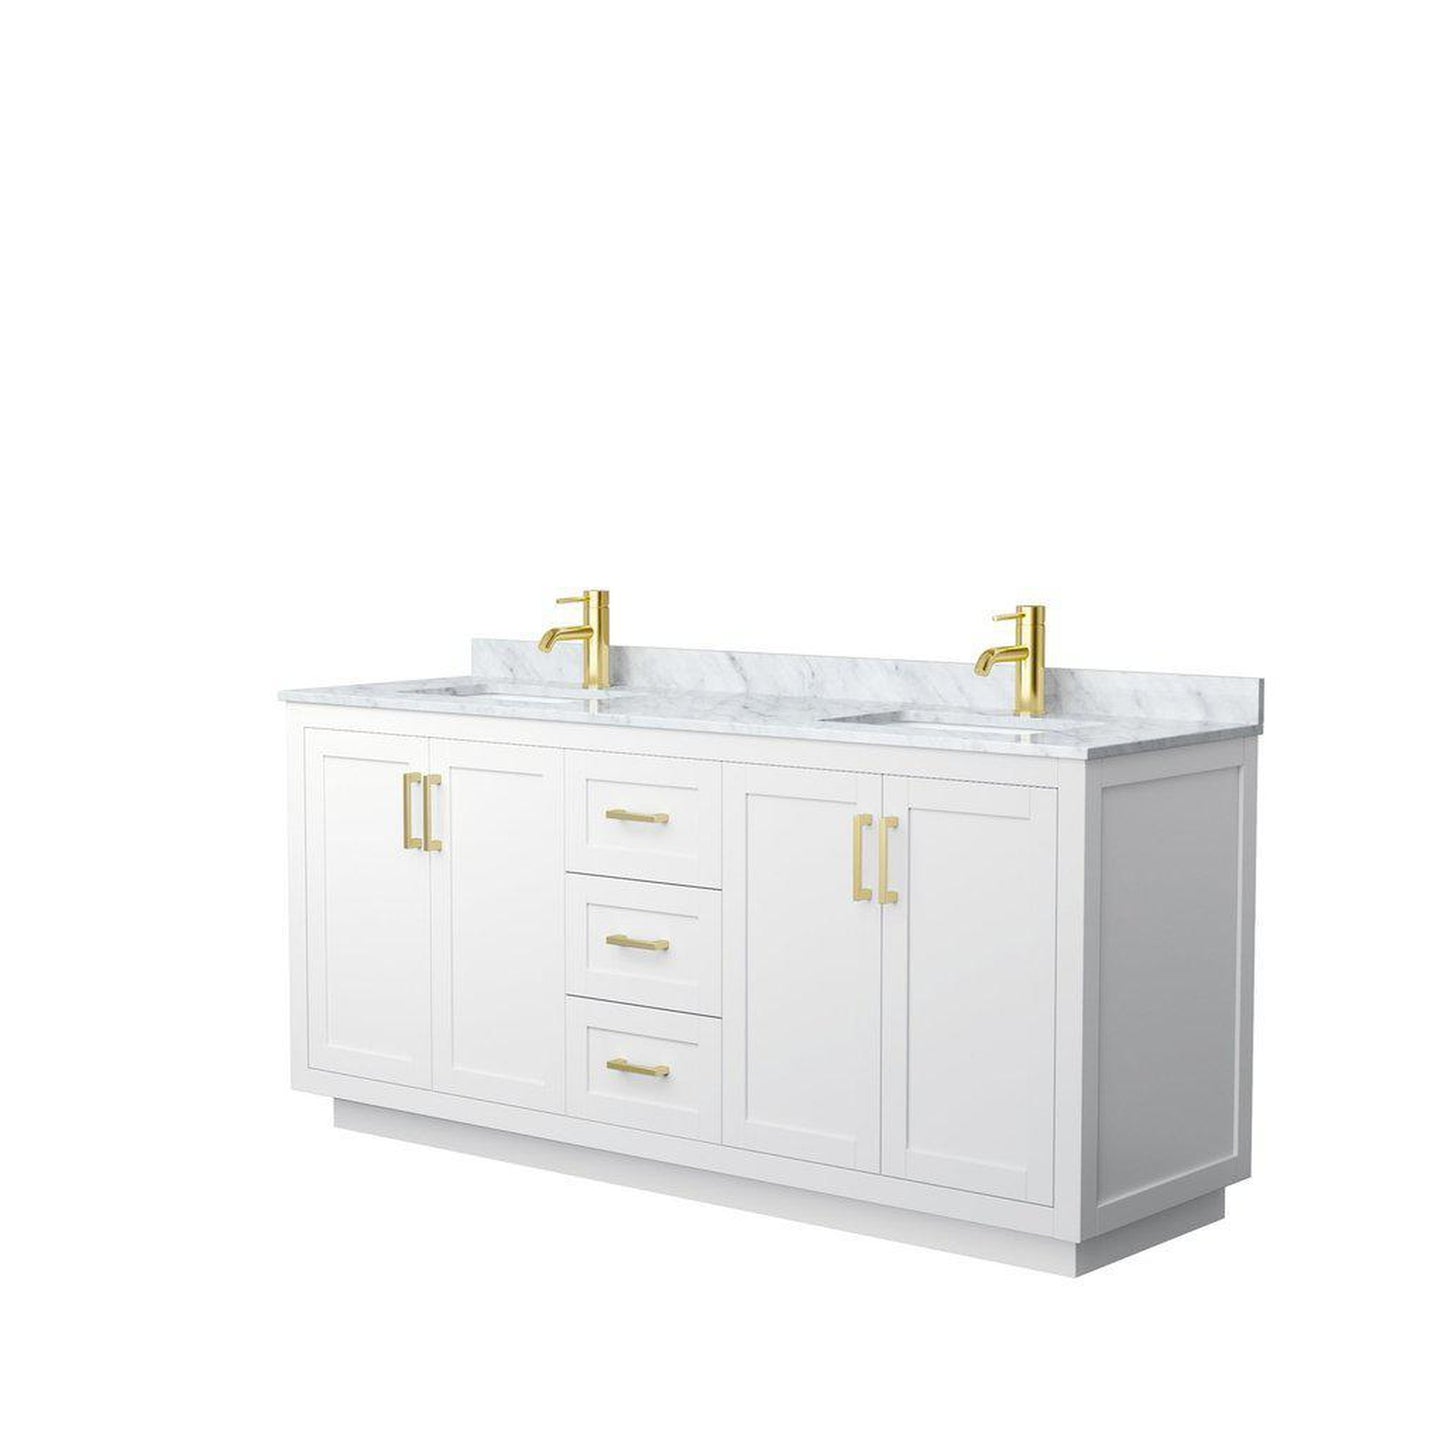 Wyndham Collection Miranda 72" Double Bathroom White Vanity Set With White Carrara Marble Countertop, Undermount Square Sink, And Brushed Gold Trim